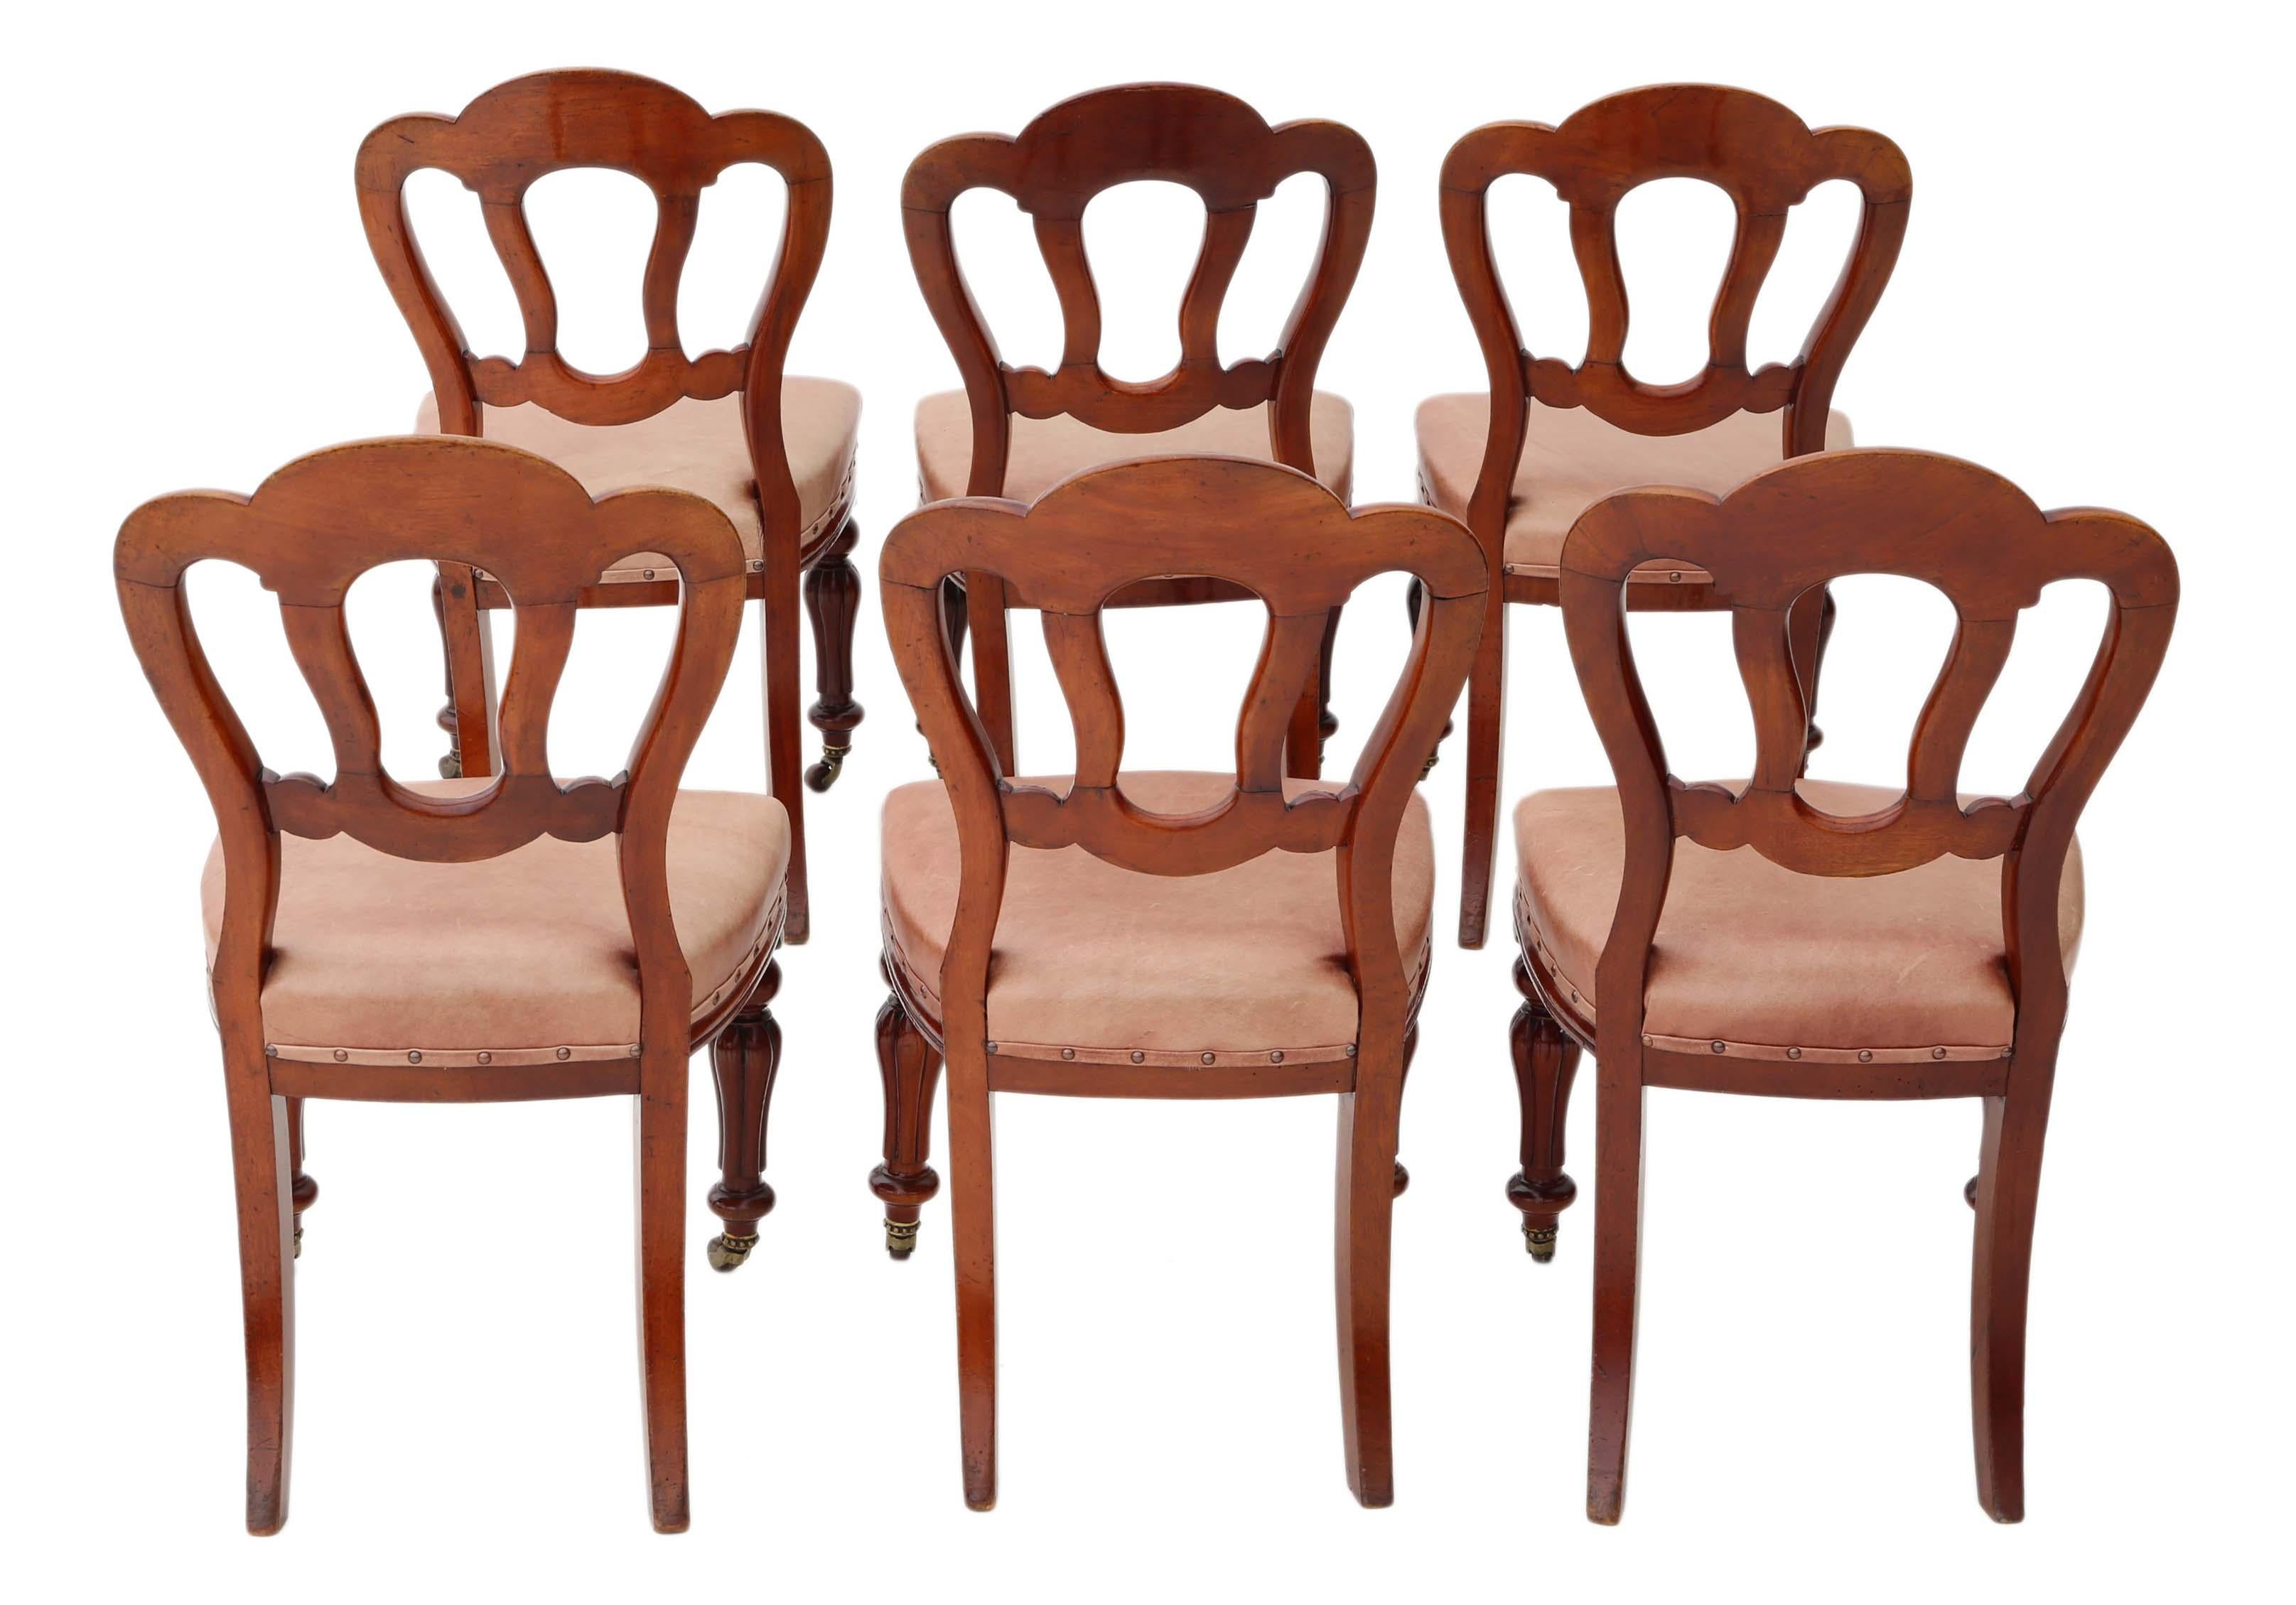 Antique set of 6 Victorian circa 1870 mahogany dining chairs.
Recently restored, solid and strong, with no loose joints and replacement leather upholstery. Brass and ceramic castors to front legs.
Would look great in the right location!
Overall